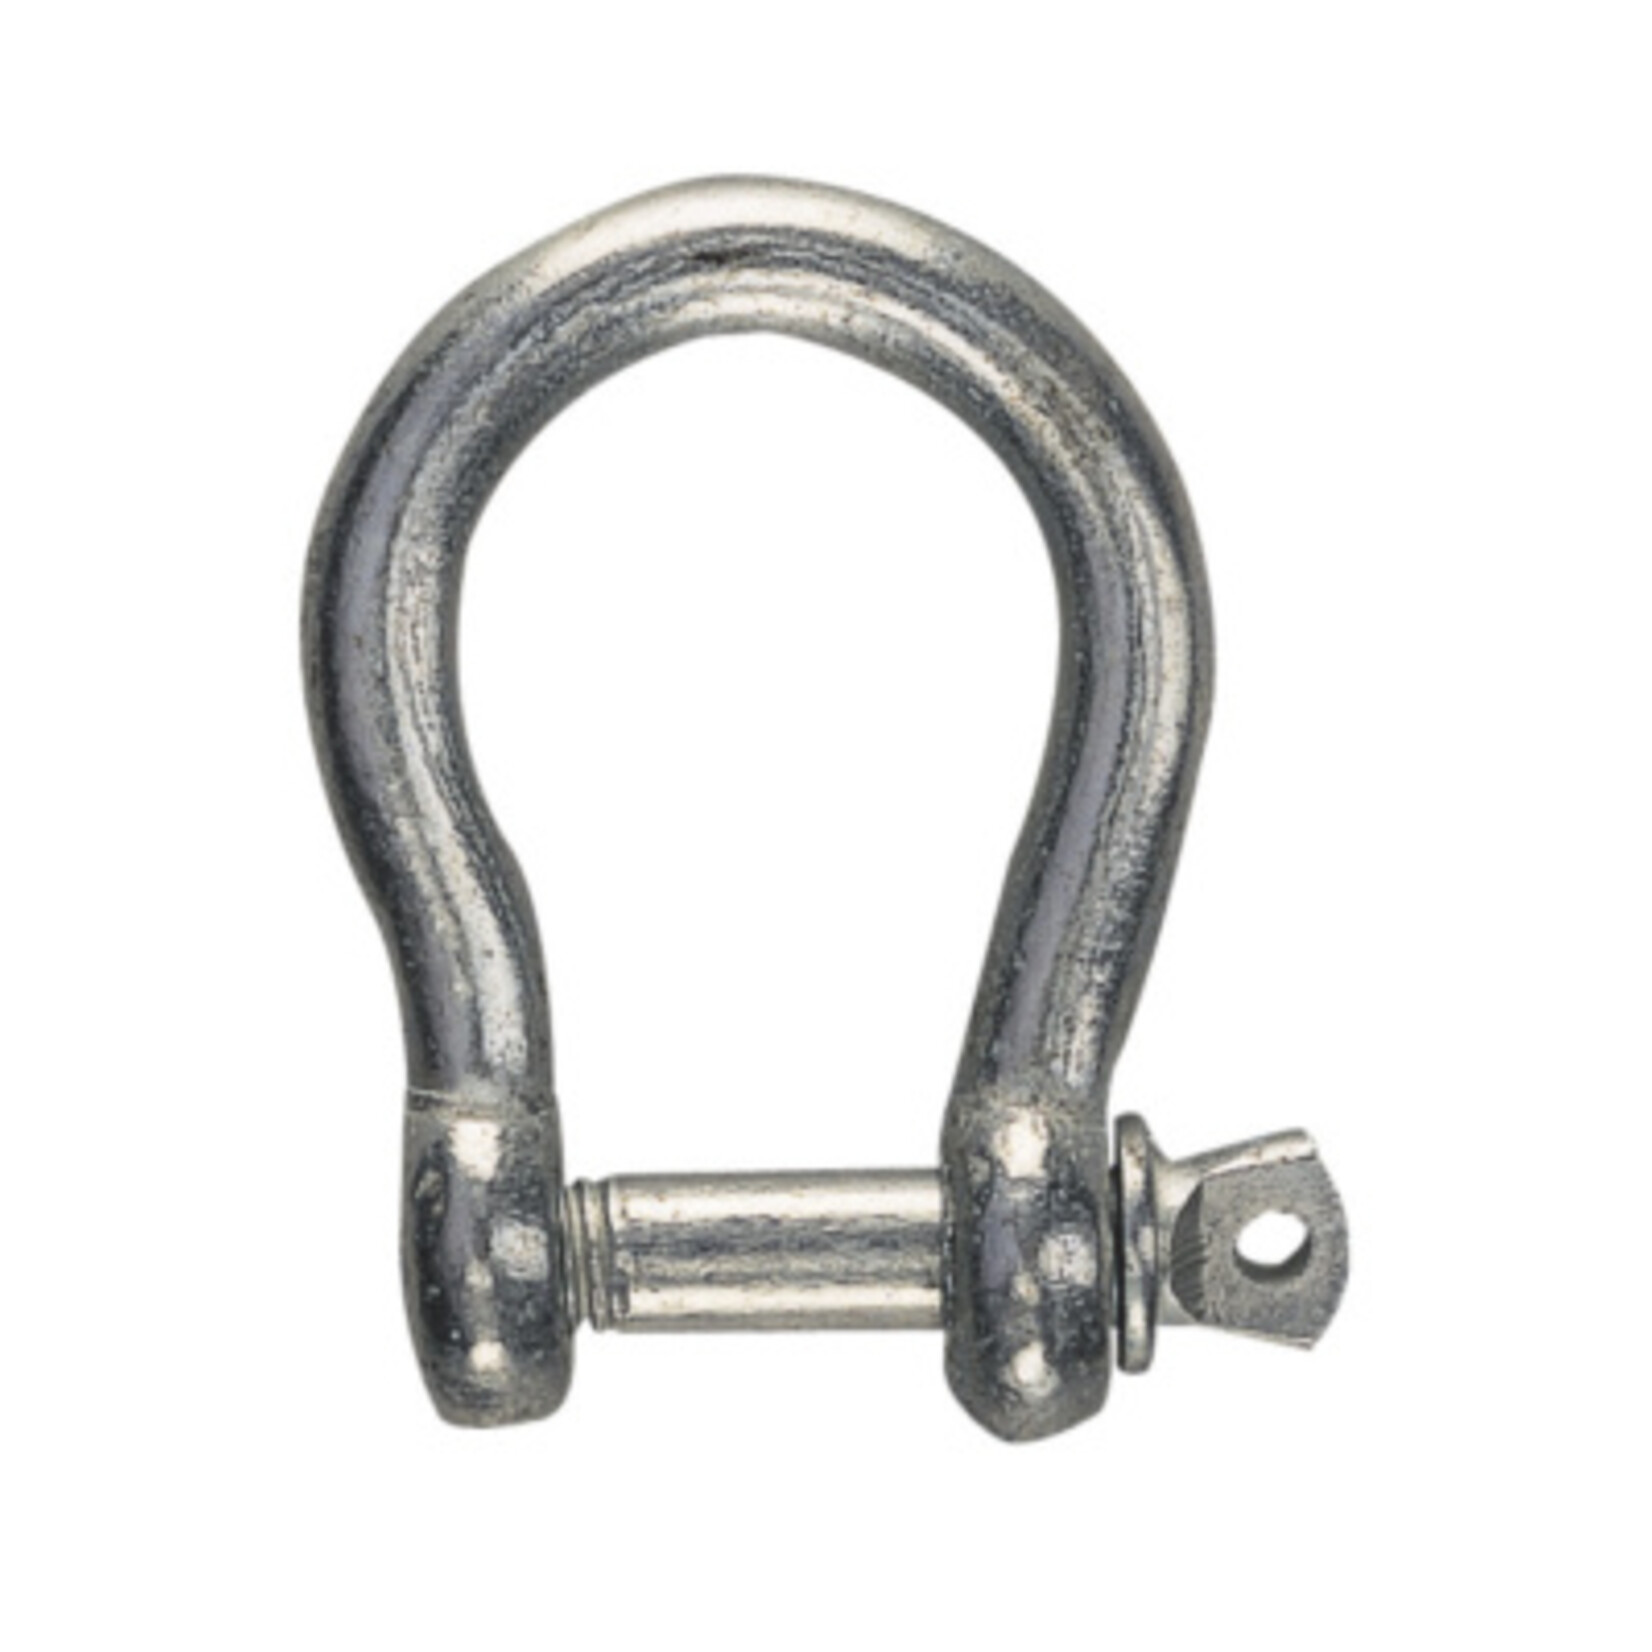 Plastimo Shackle gal bow dia 8mm yellow code